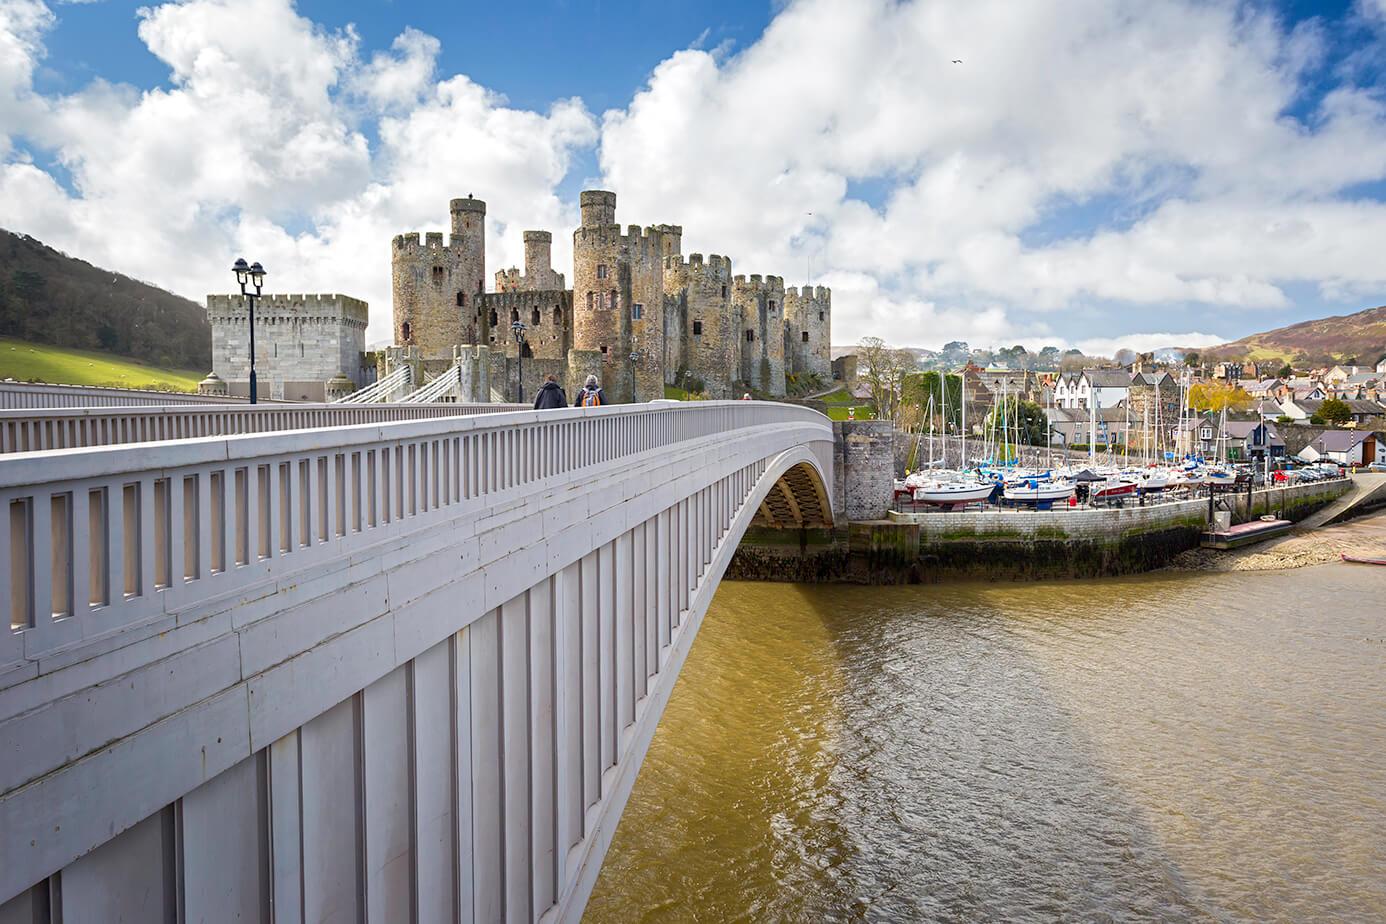 Conwy touchscreen kiosk up for Cardiff Design award image